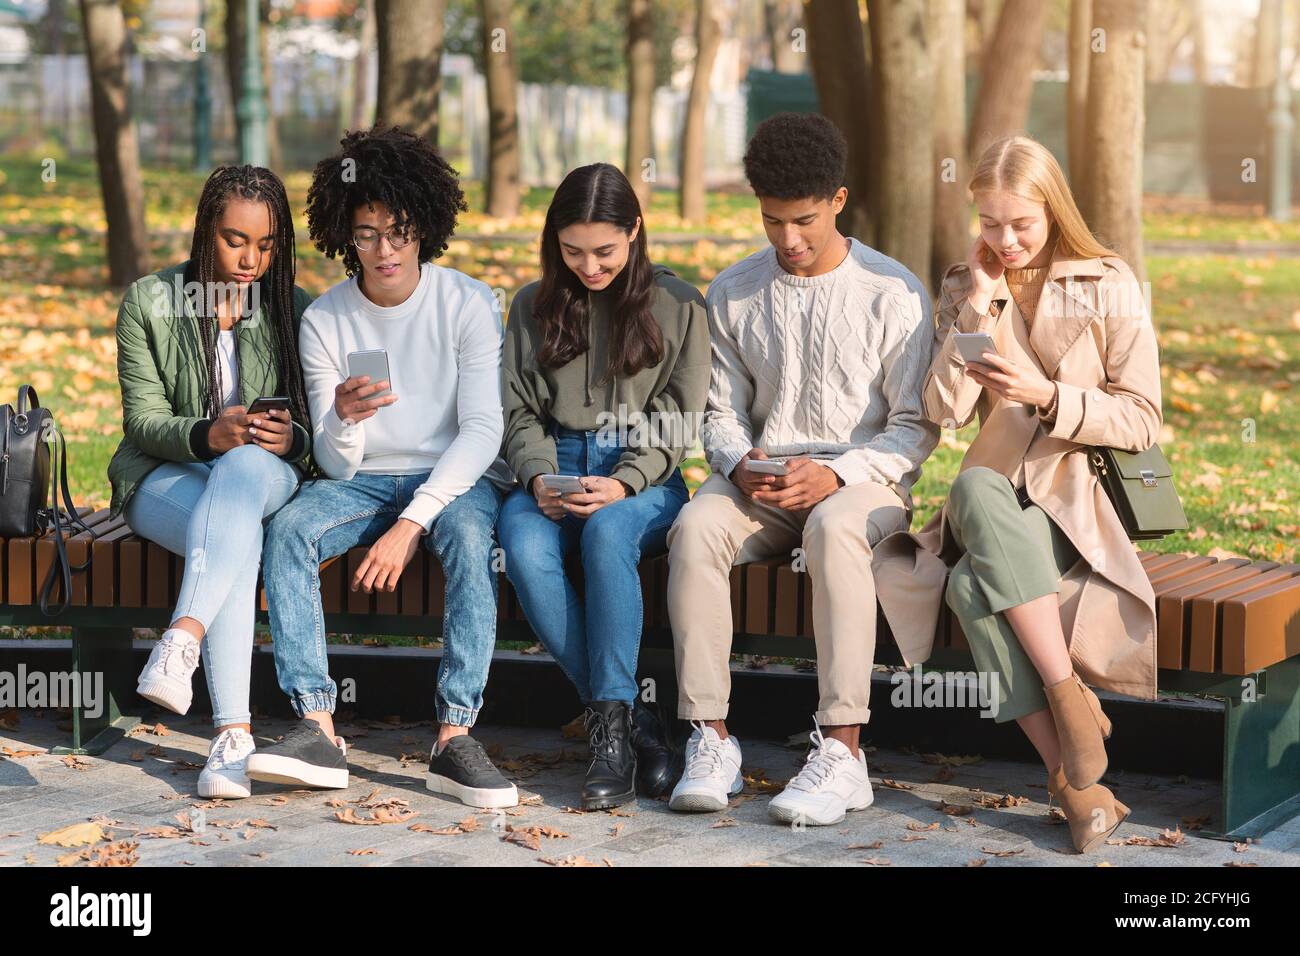 Teenagers sitting on bench in park and using smartphones Stock Photo